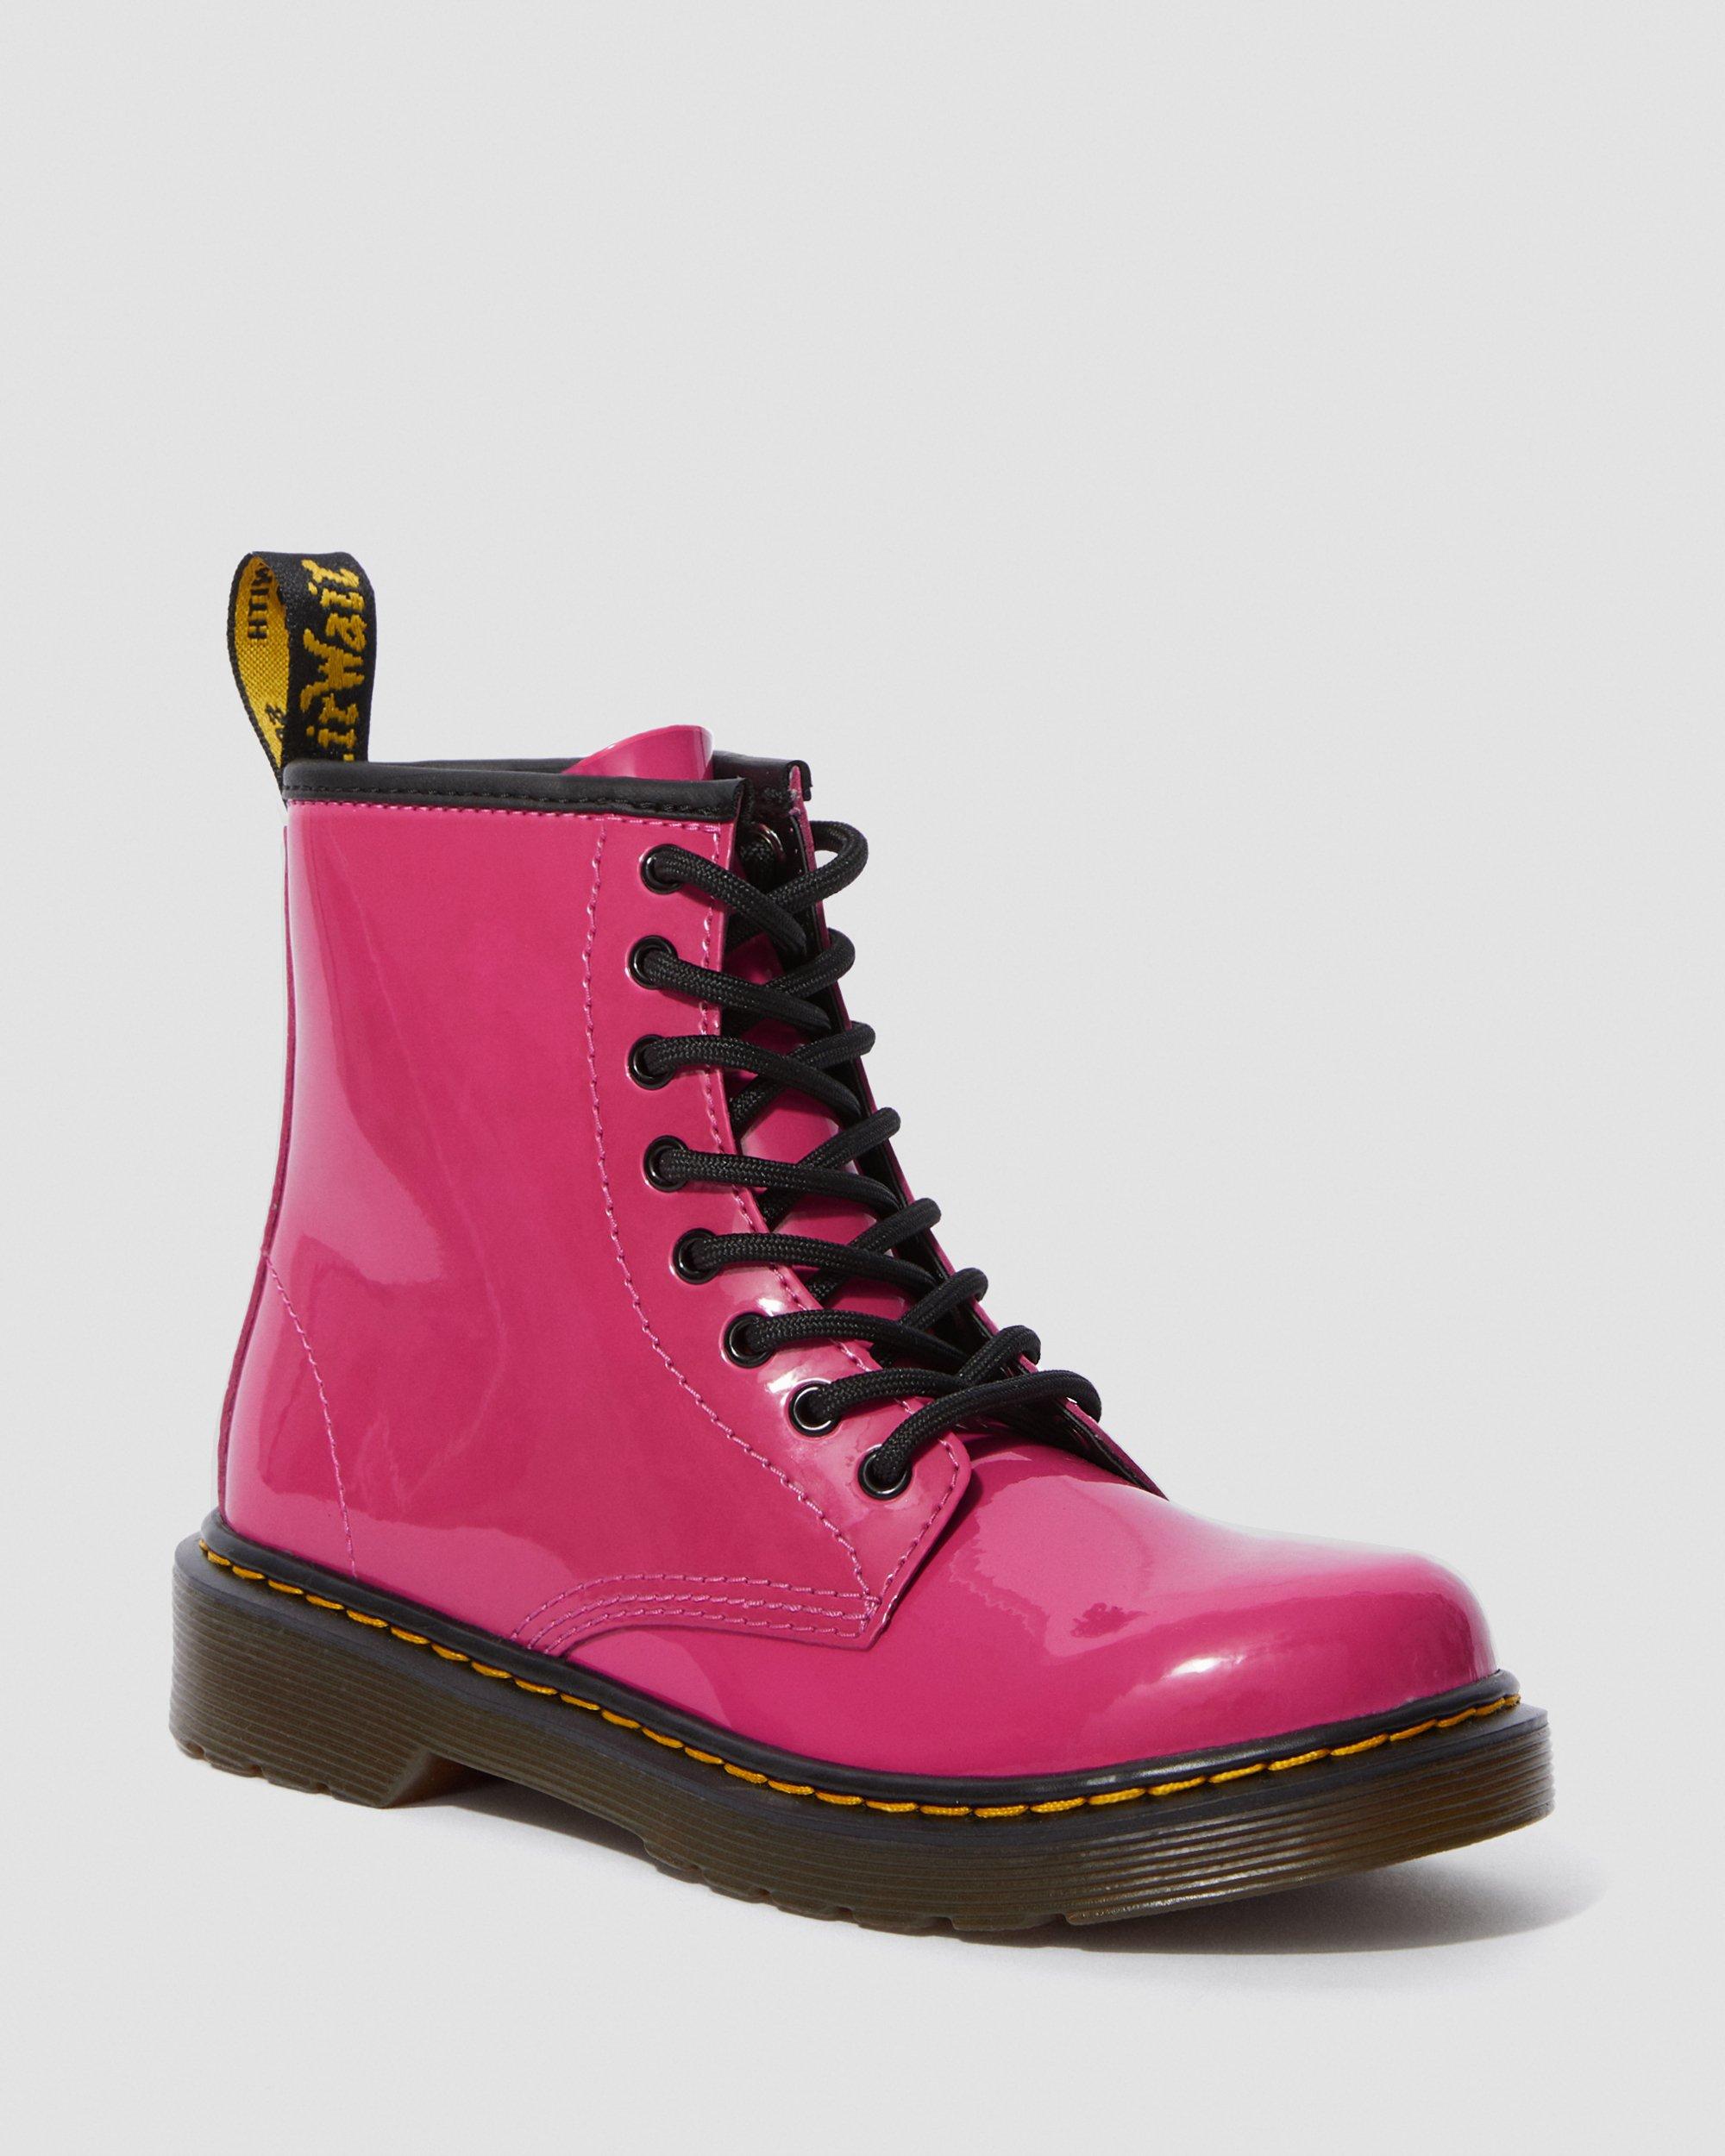 Dr. Martens Junior 1460 Rainbow Patent Leather Lace Up Boots in Black